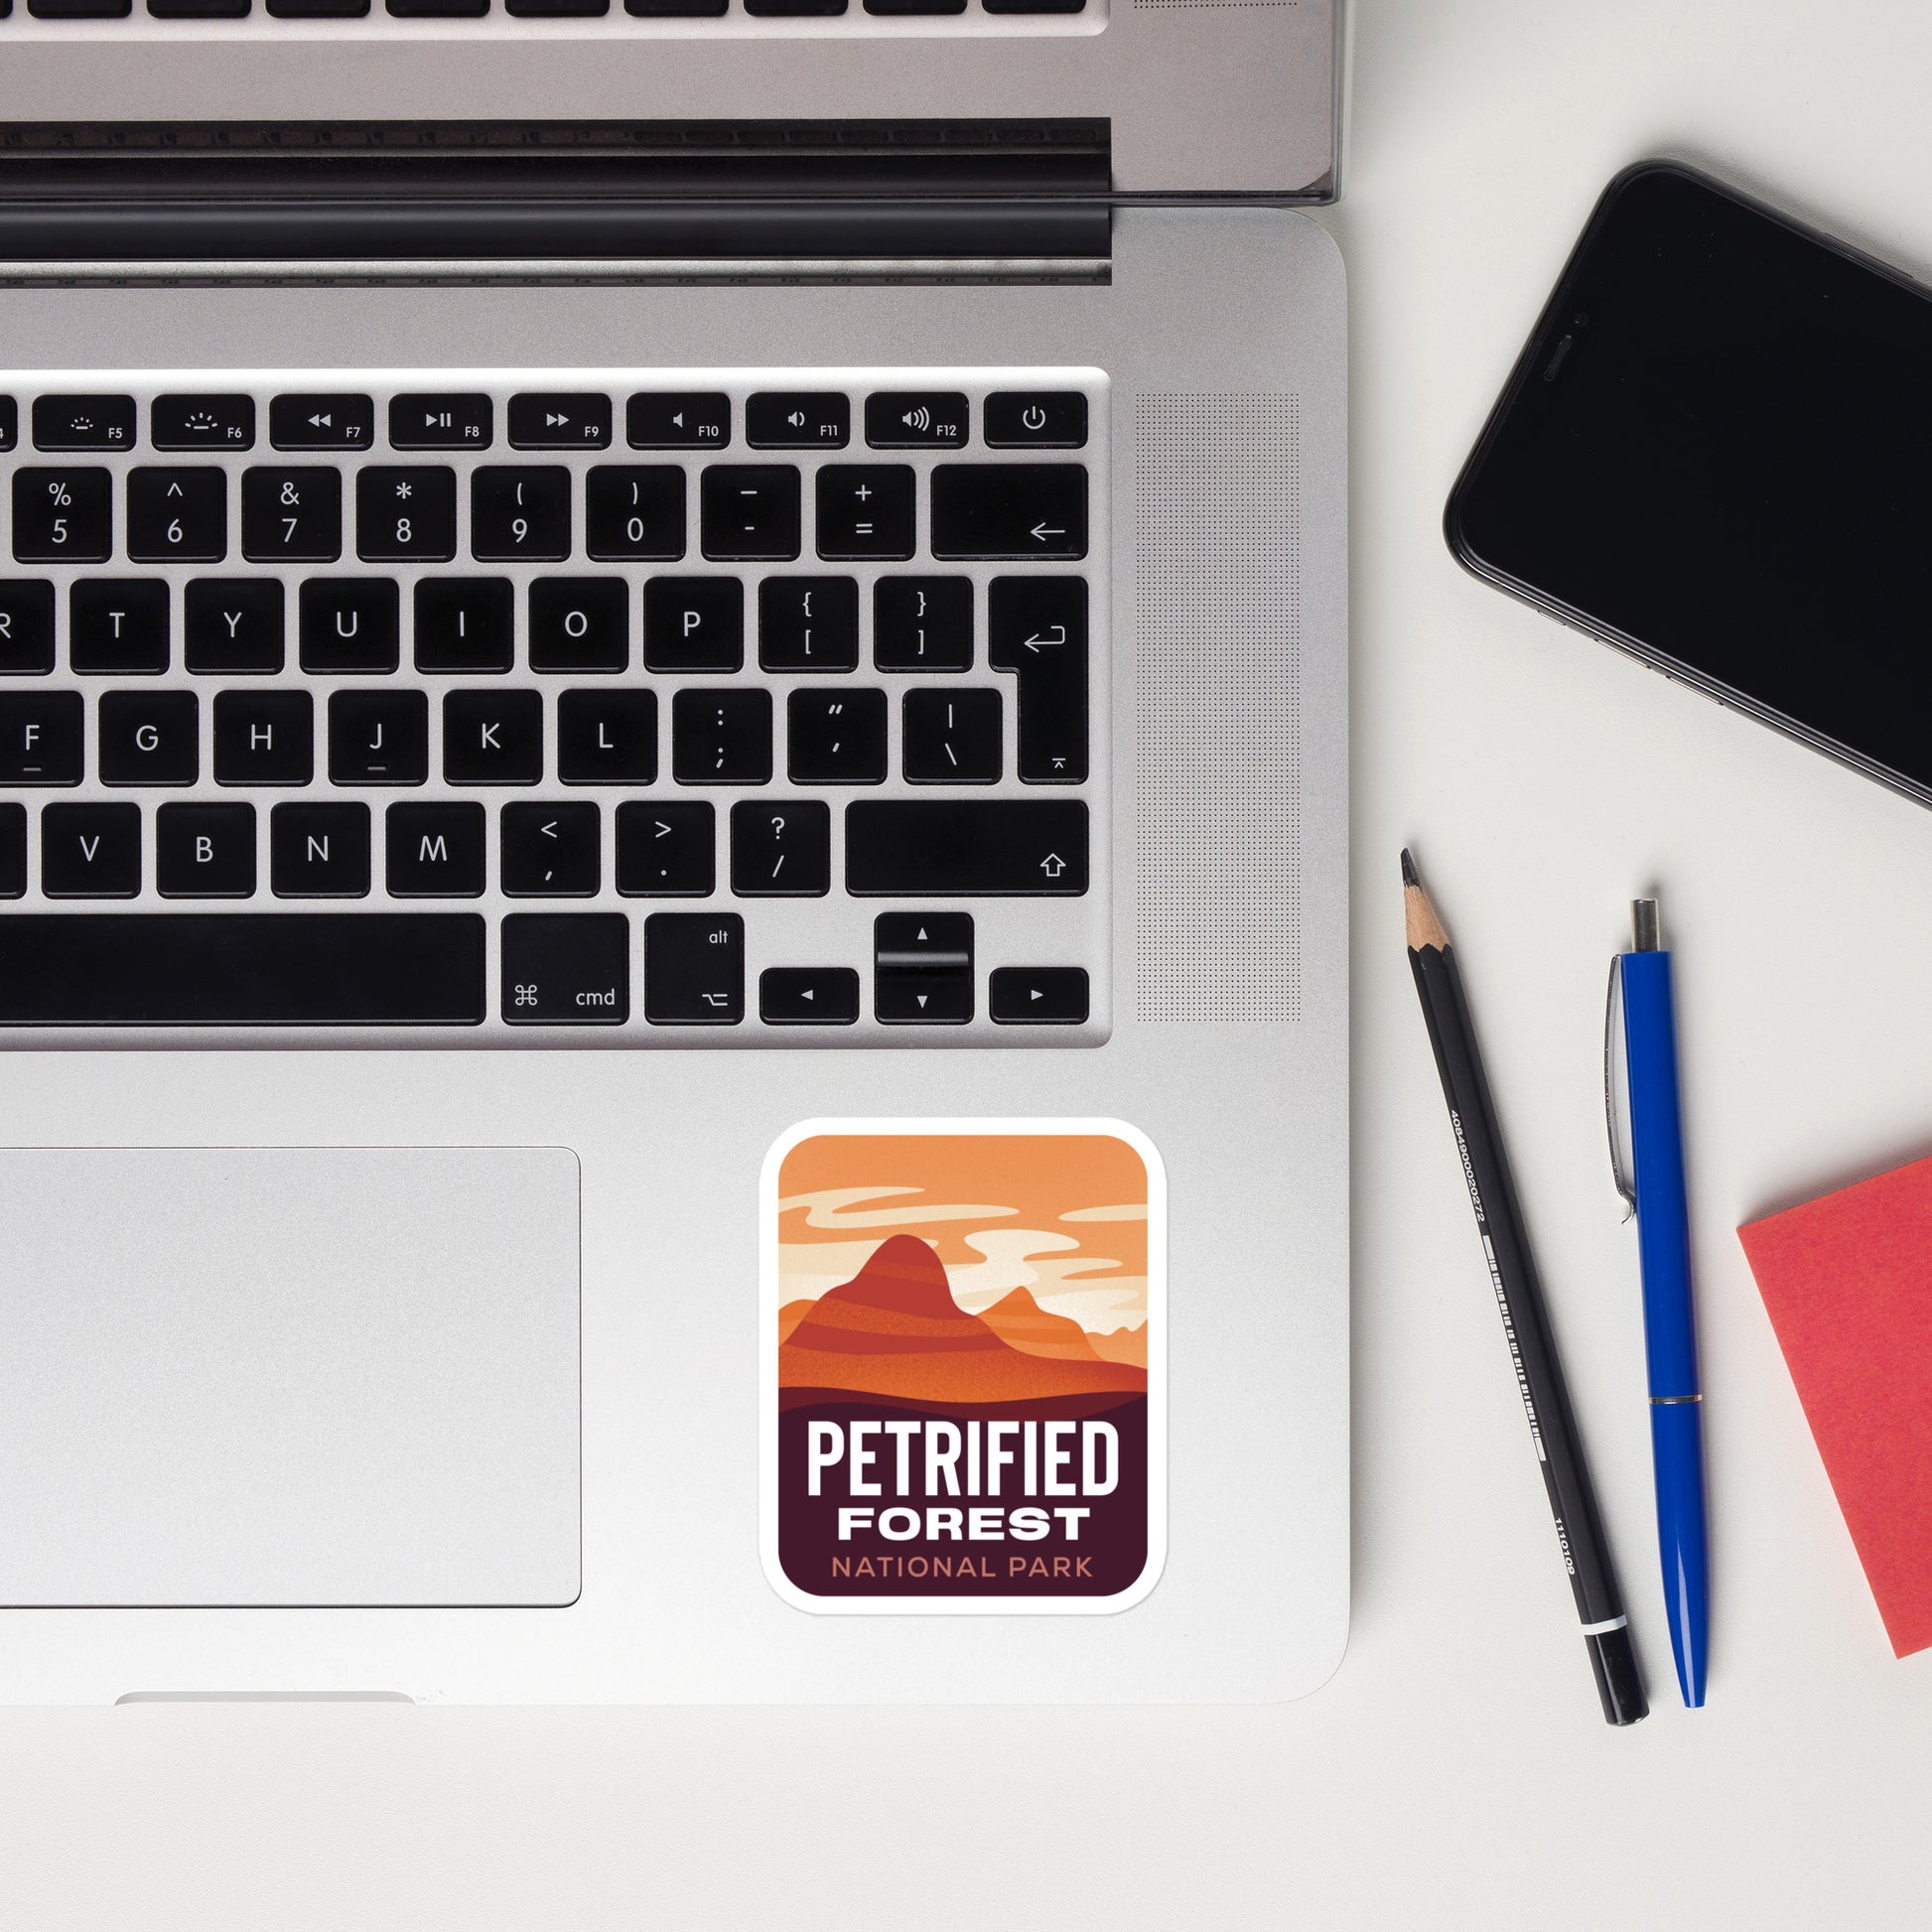 A sticker of Petrified Forest National Park on a laptop